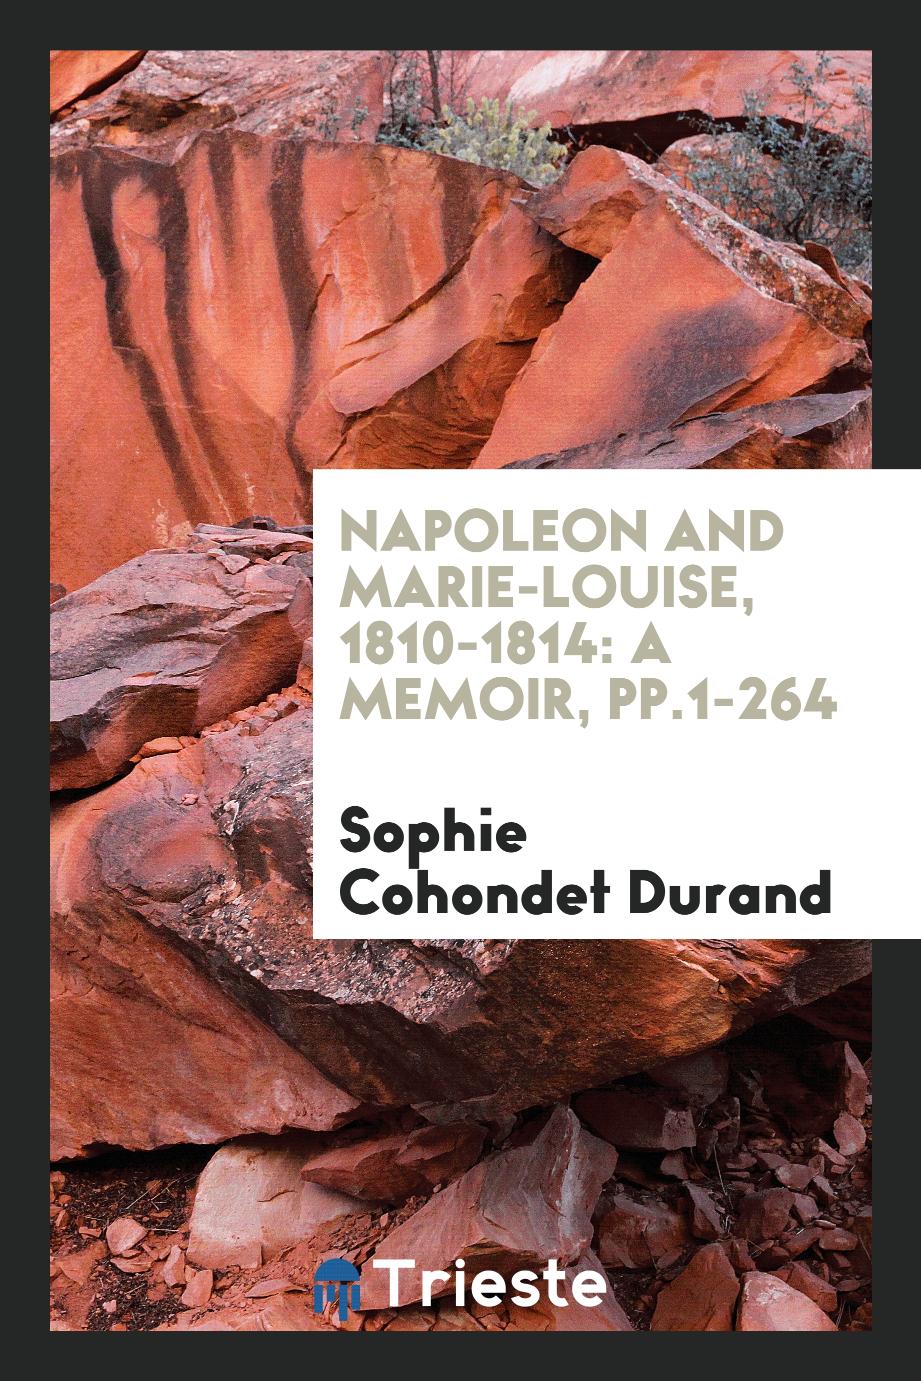 Napoleon and Marie-Louise, 1810-1814: A Memoir, pp.1-264